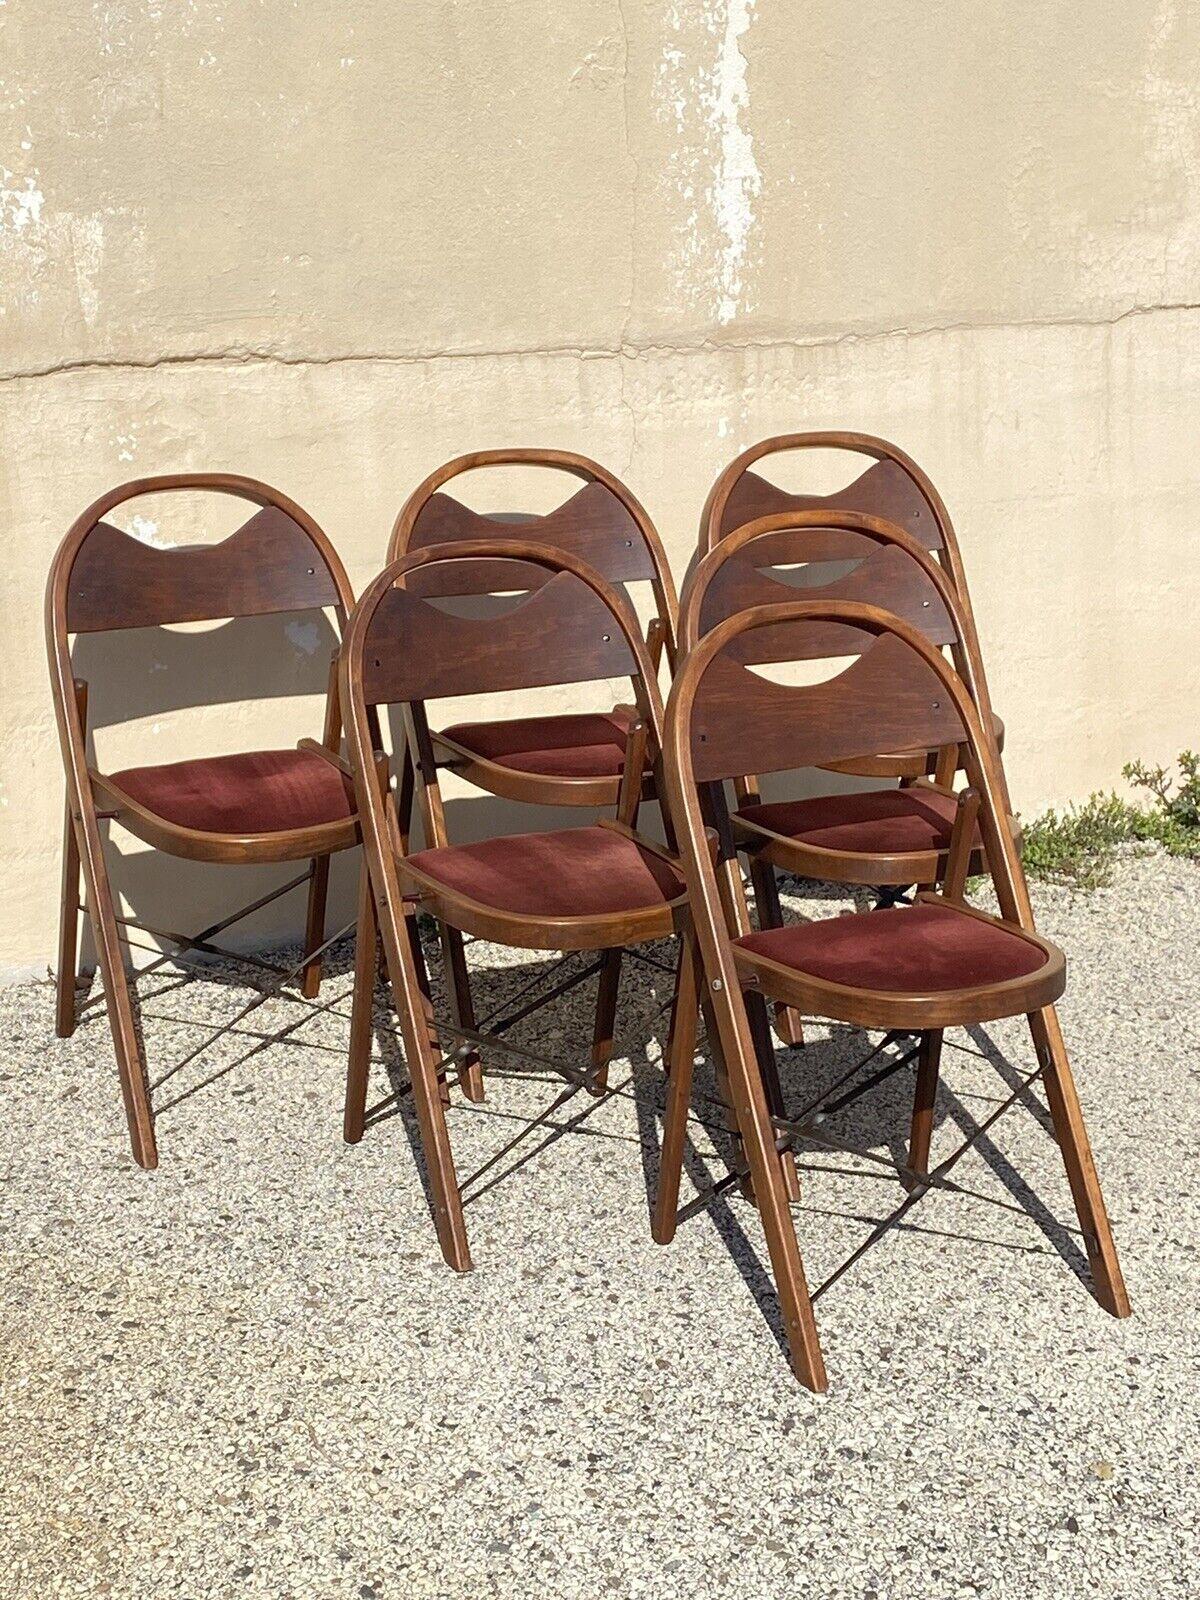 Vintage Art Deco Wooden Theatre Folding Chairs by General Sales Co Set of 6 'B' For Sale 8